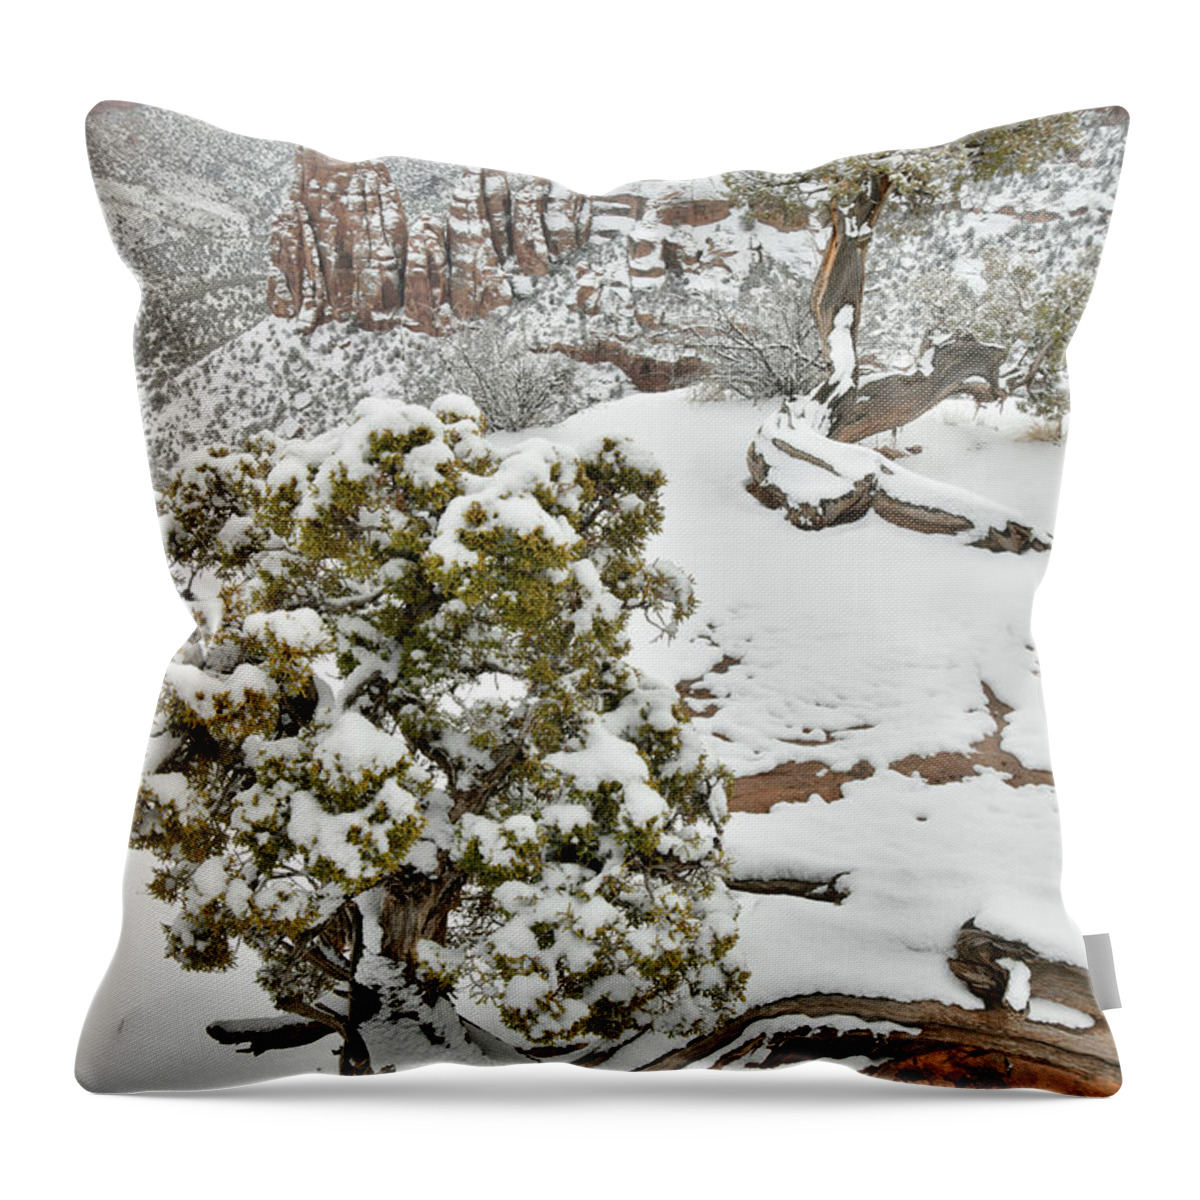 Colorado National Monument Throw Pillow featuring the photograph Along Rim Rock Drive in Colorado National Monument by Ray Mathis